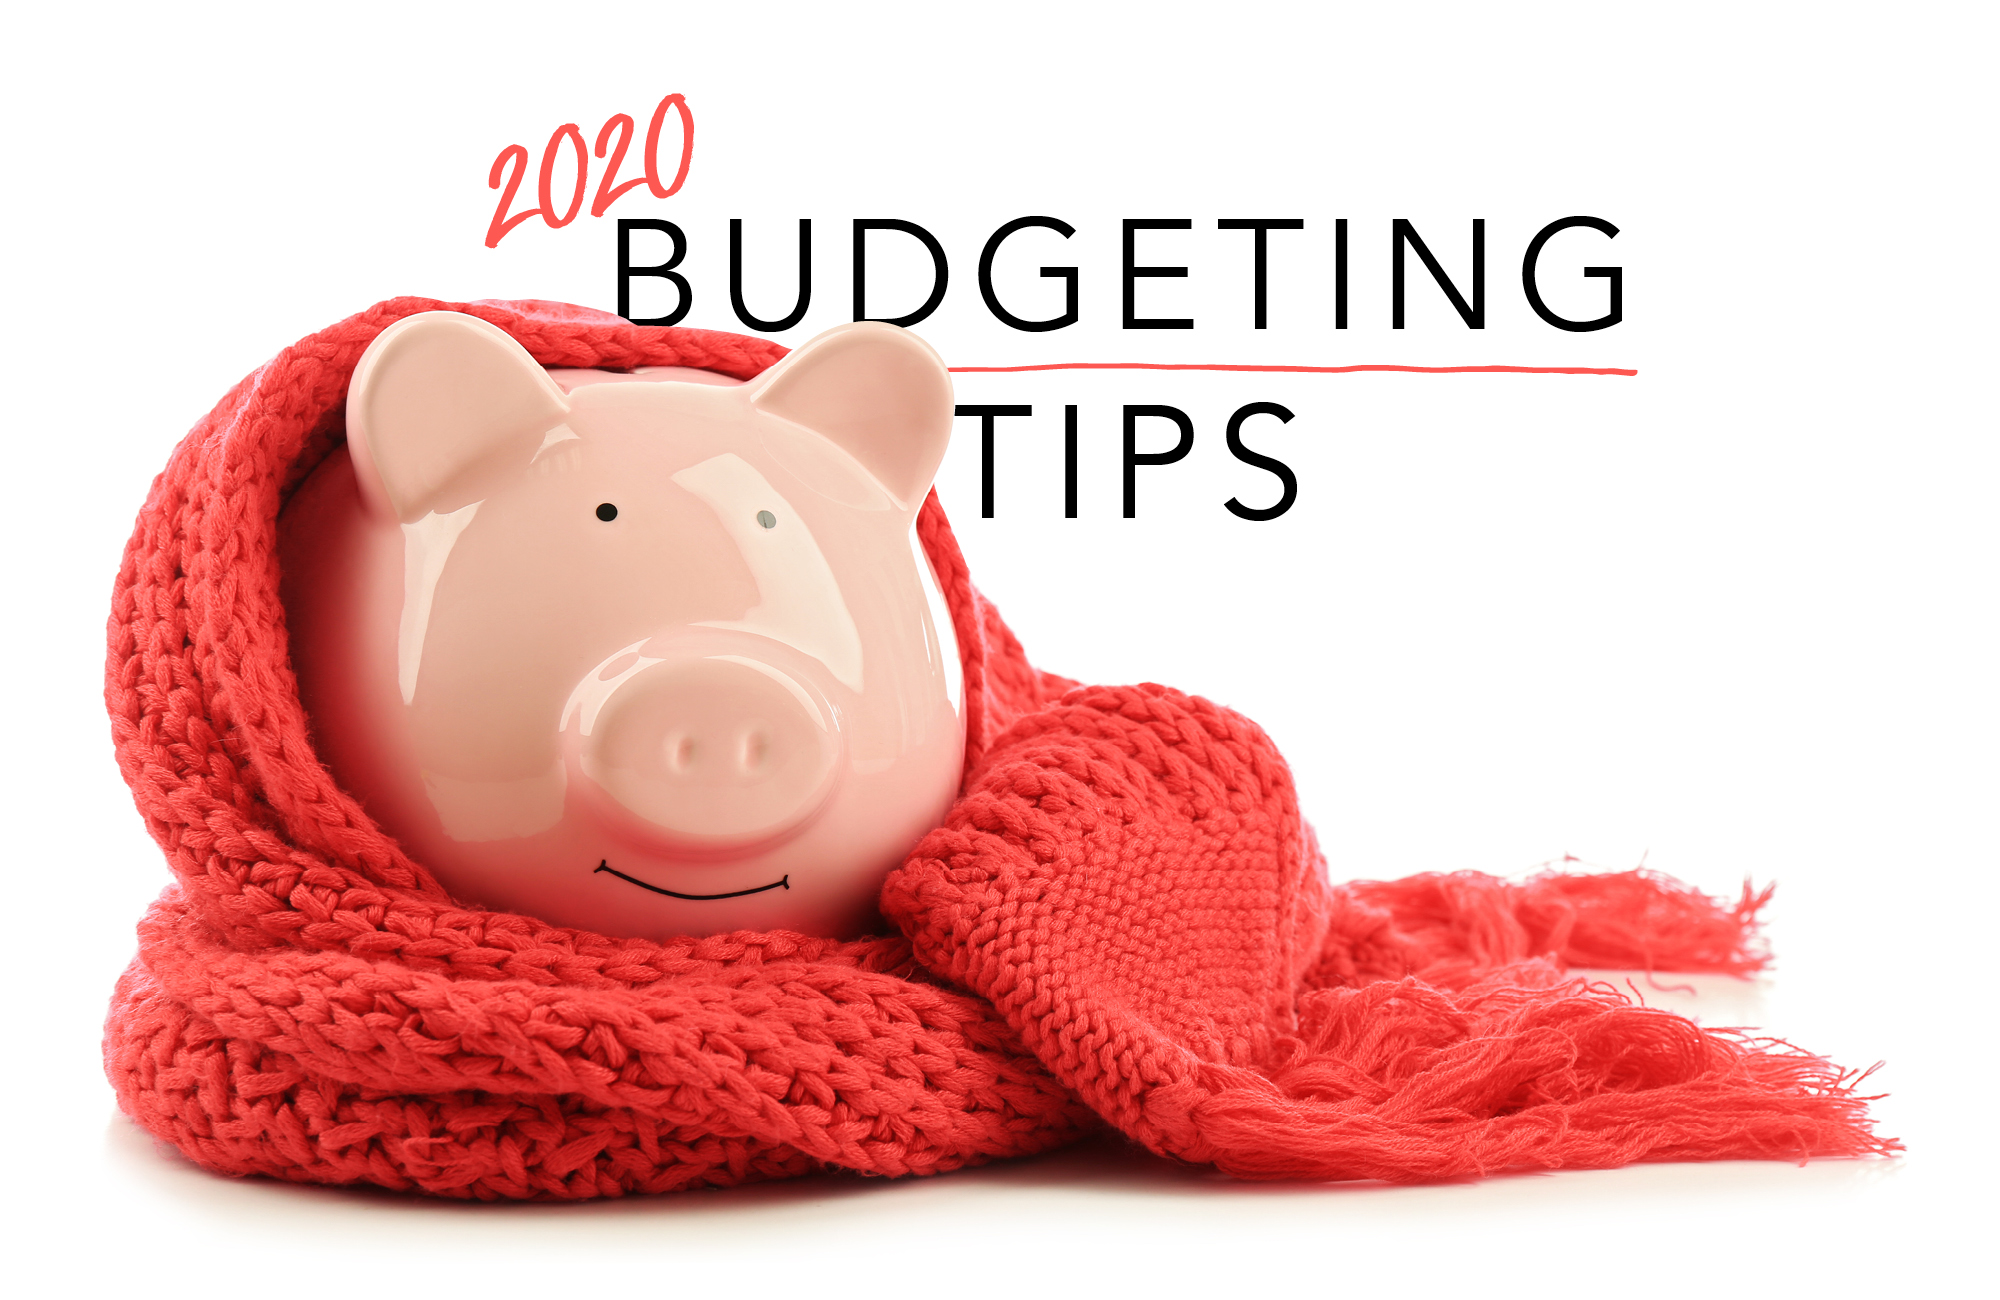 Tips to Get Your Budget Back on Track